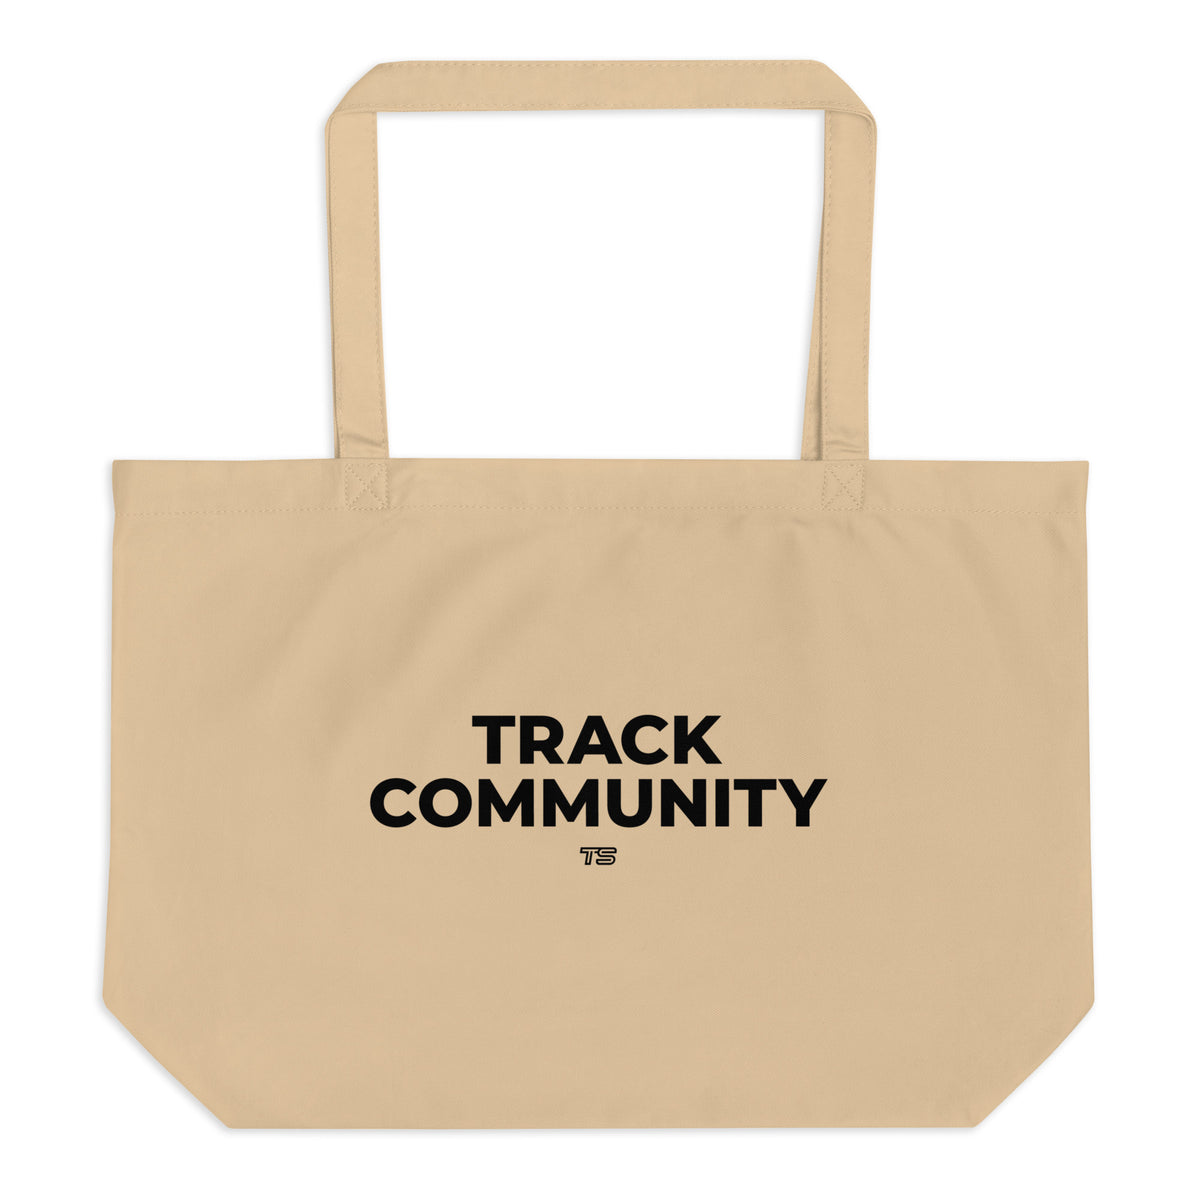 Tote Track and Field Bag